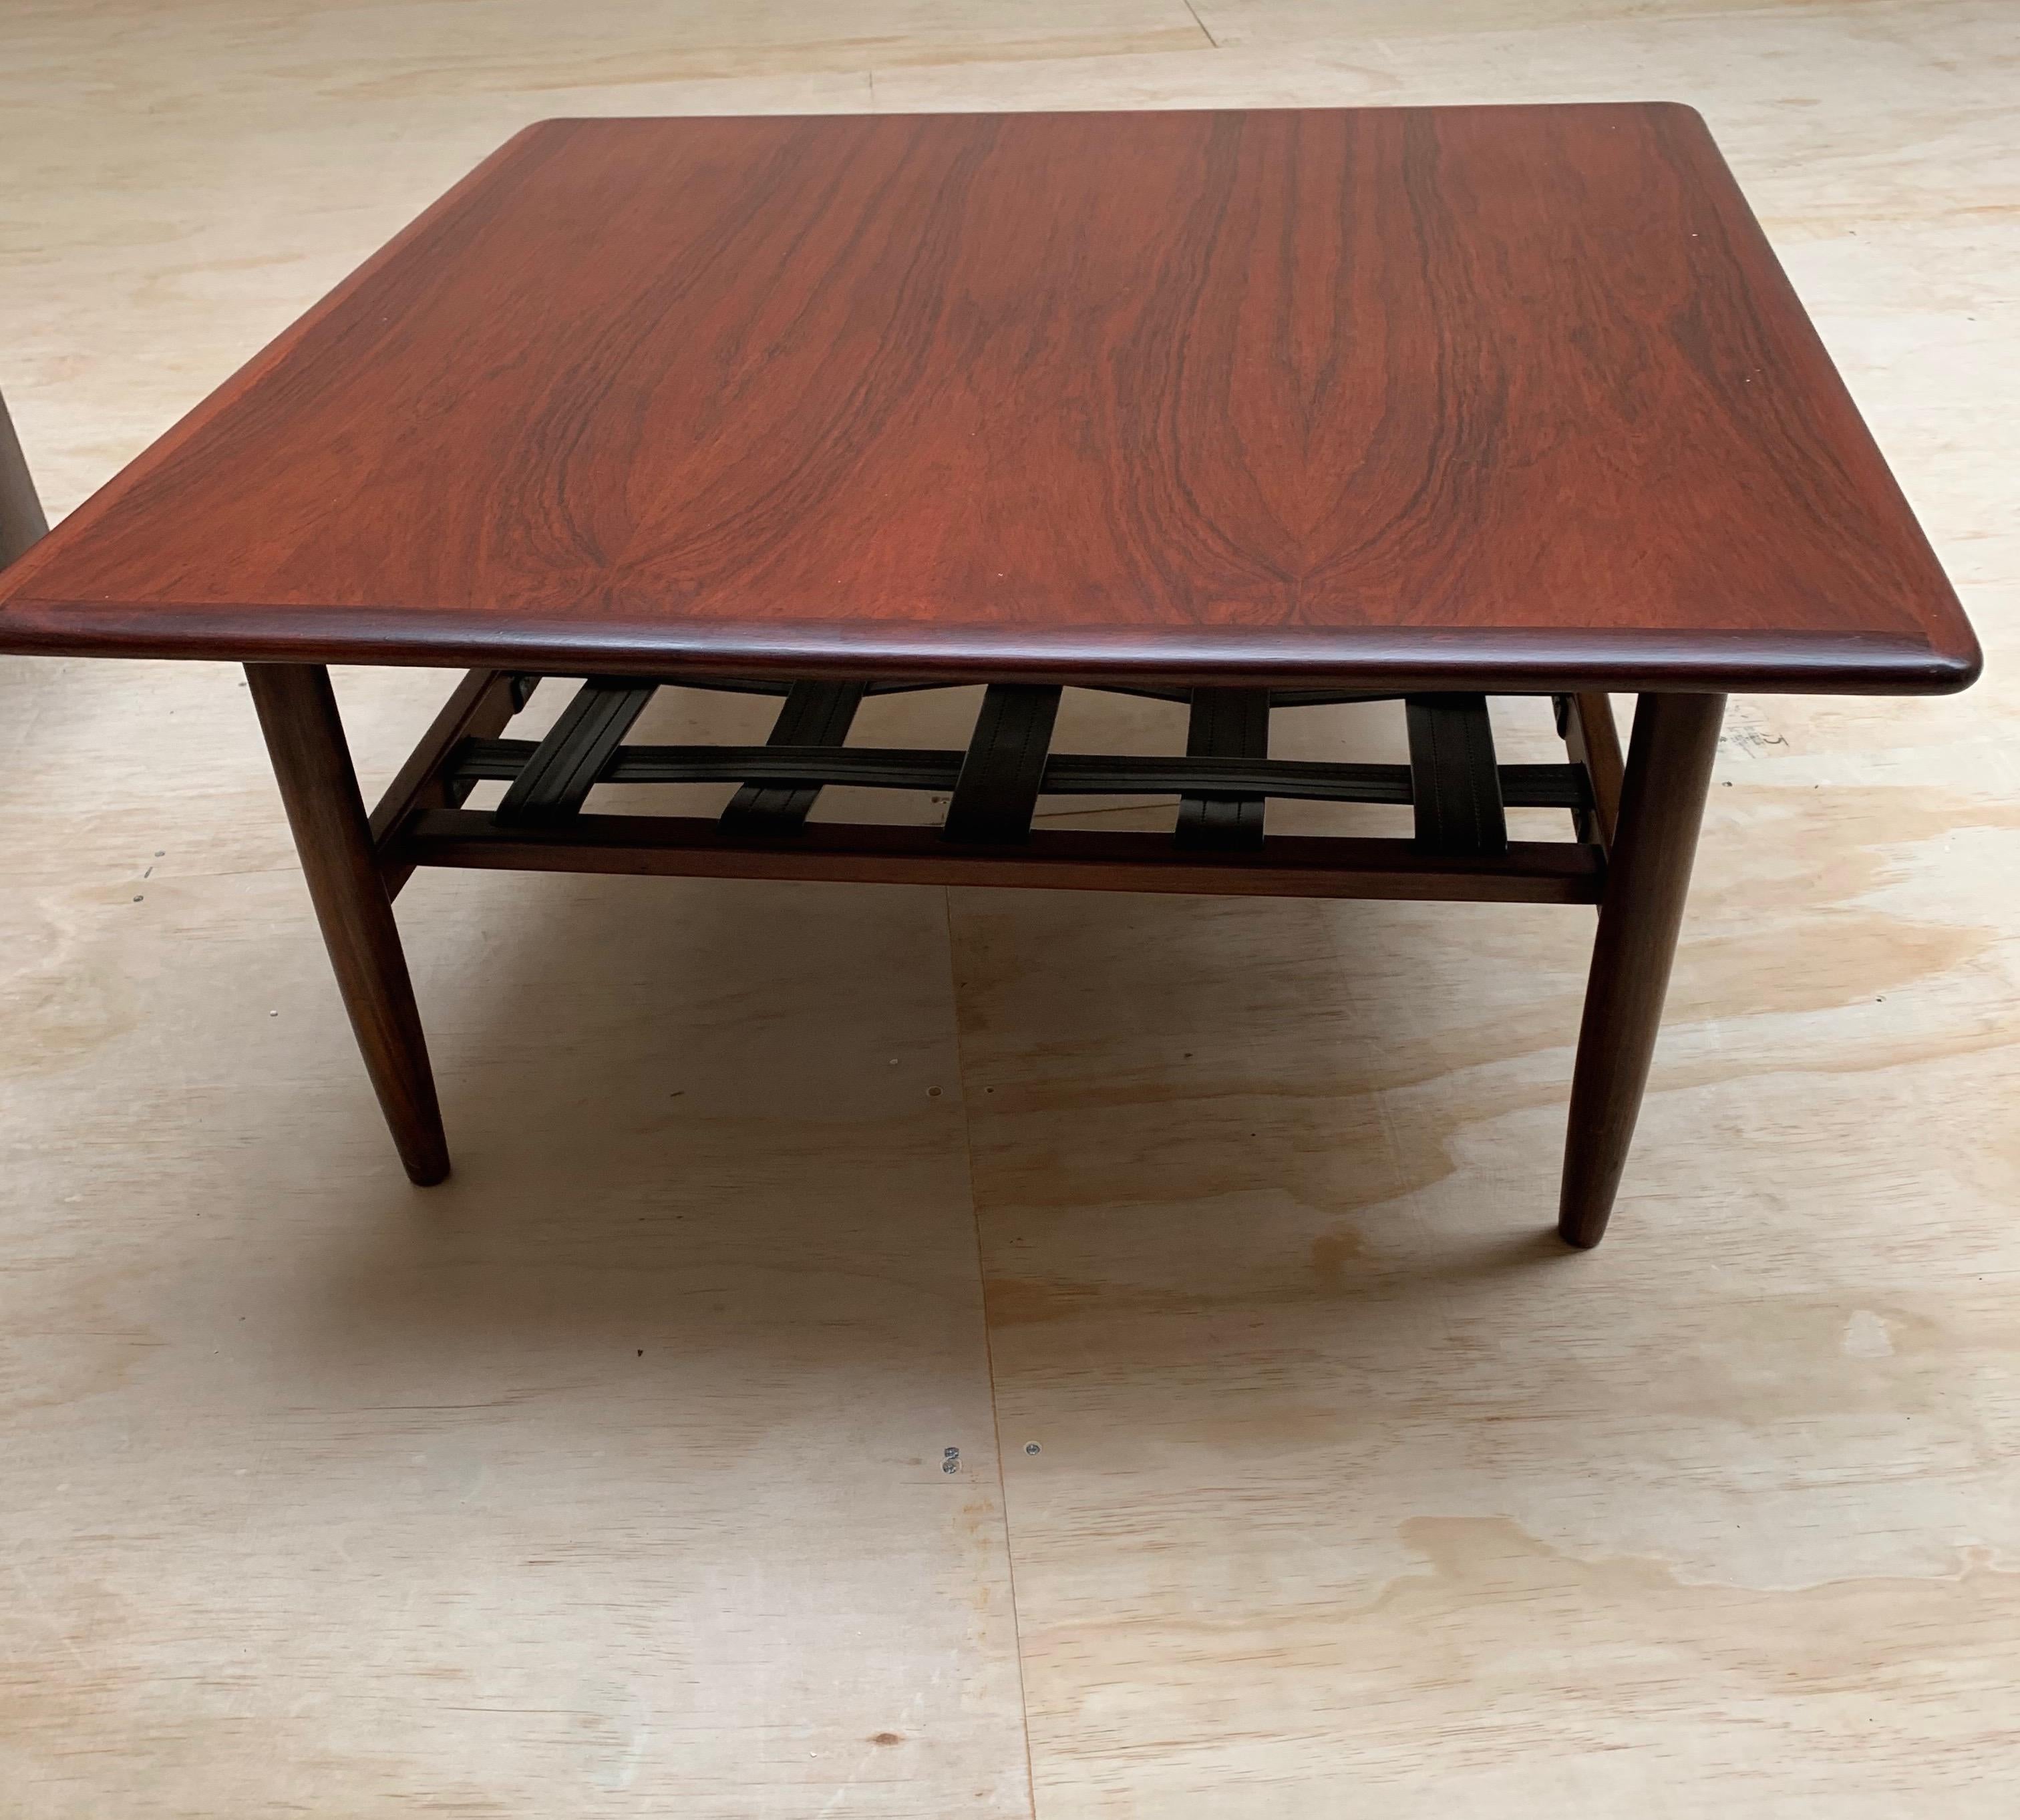 1960s Danish design multi purpose table.

This vintage Scandinavian coffee, sofa or end table is beautiful both in design and condition. The natural grain in the hardwood tabletop and the striking rounded elements are an absolute joy to watch. The